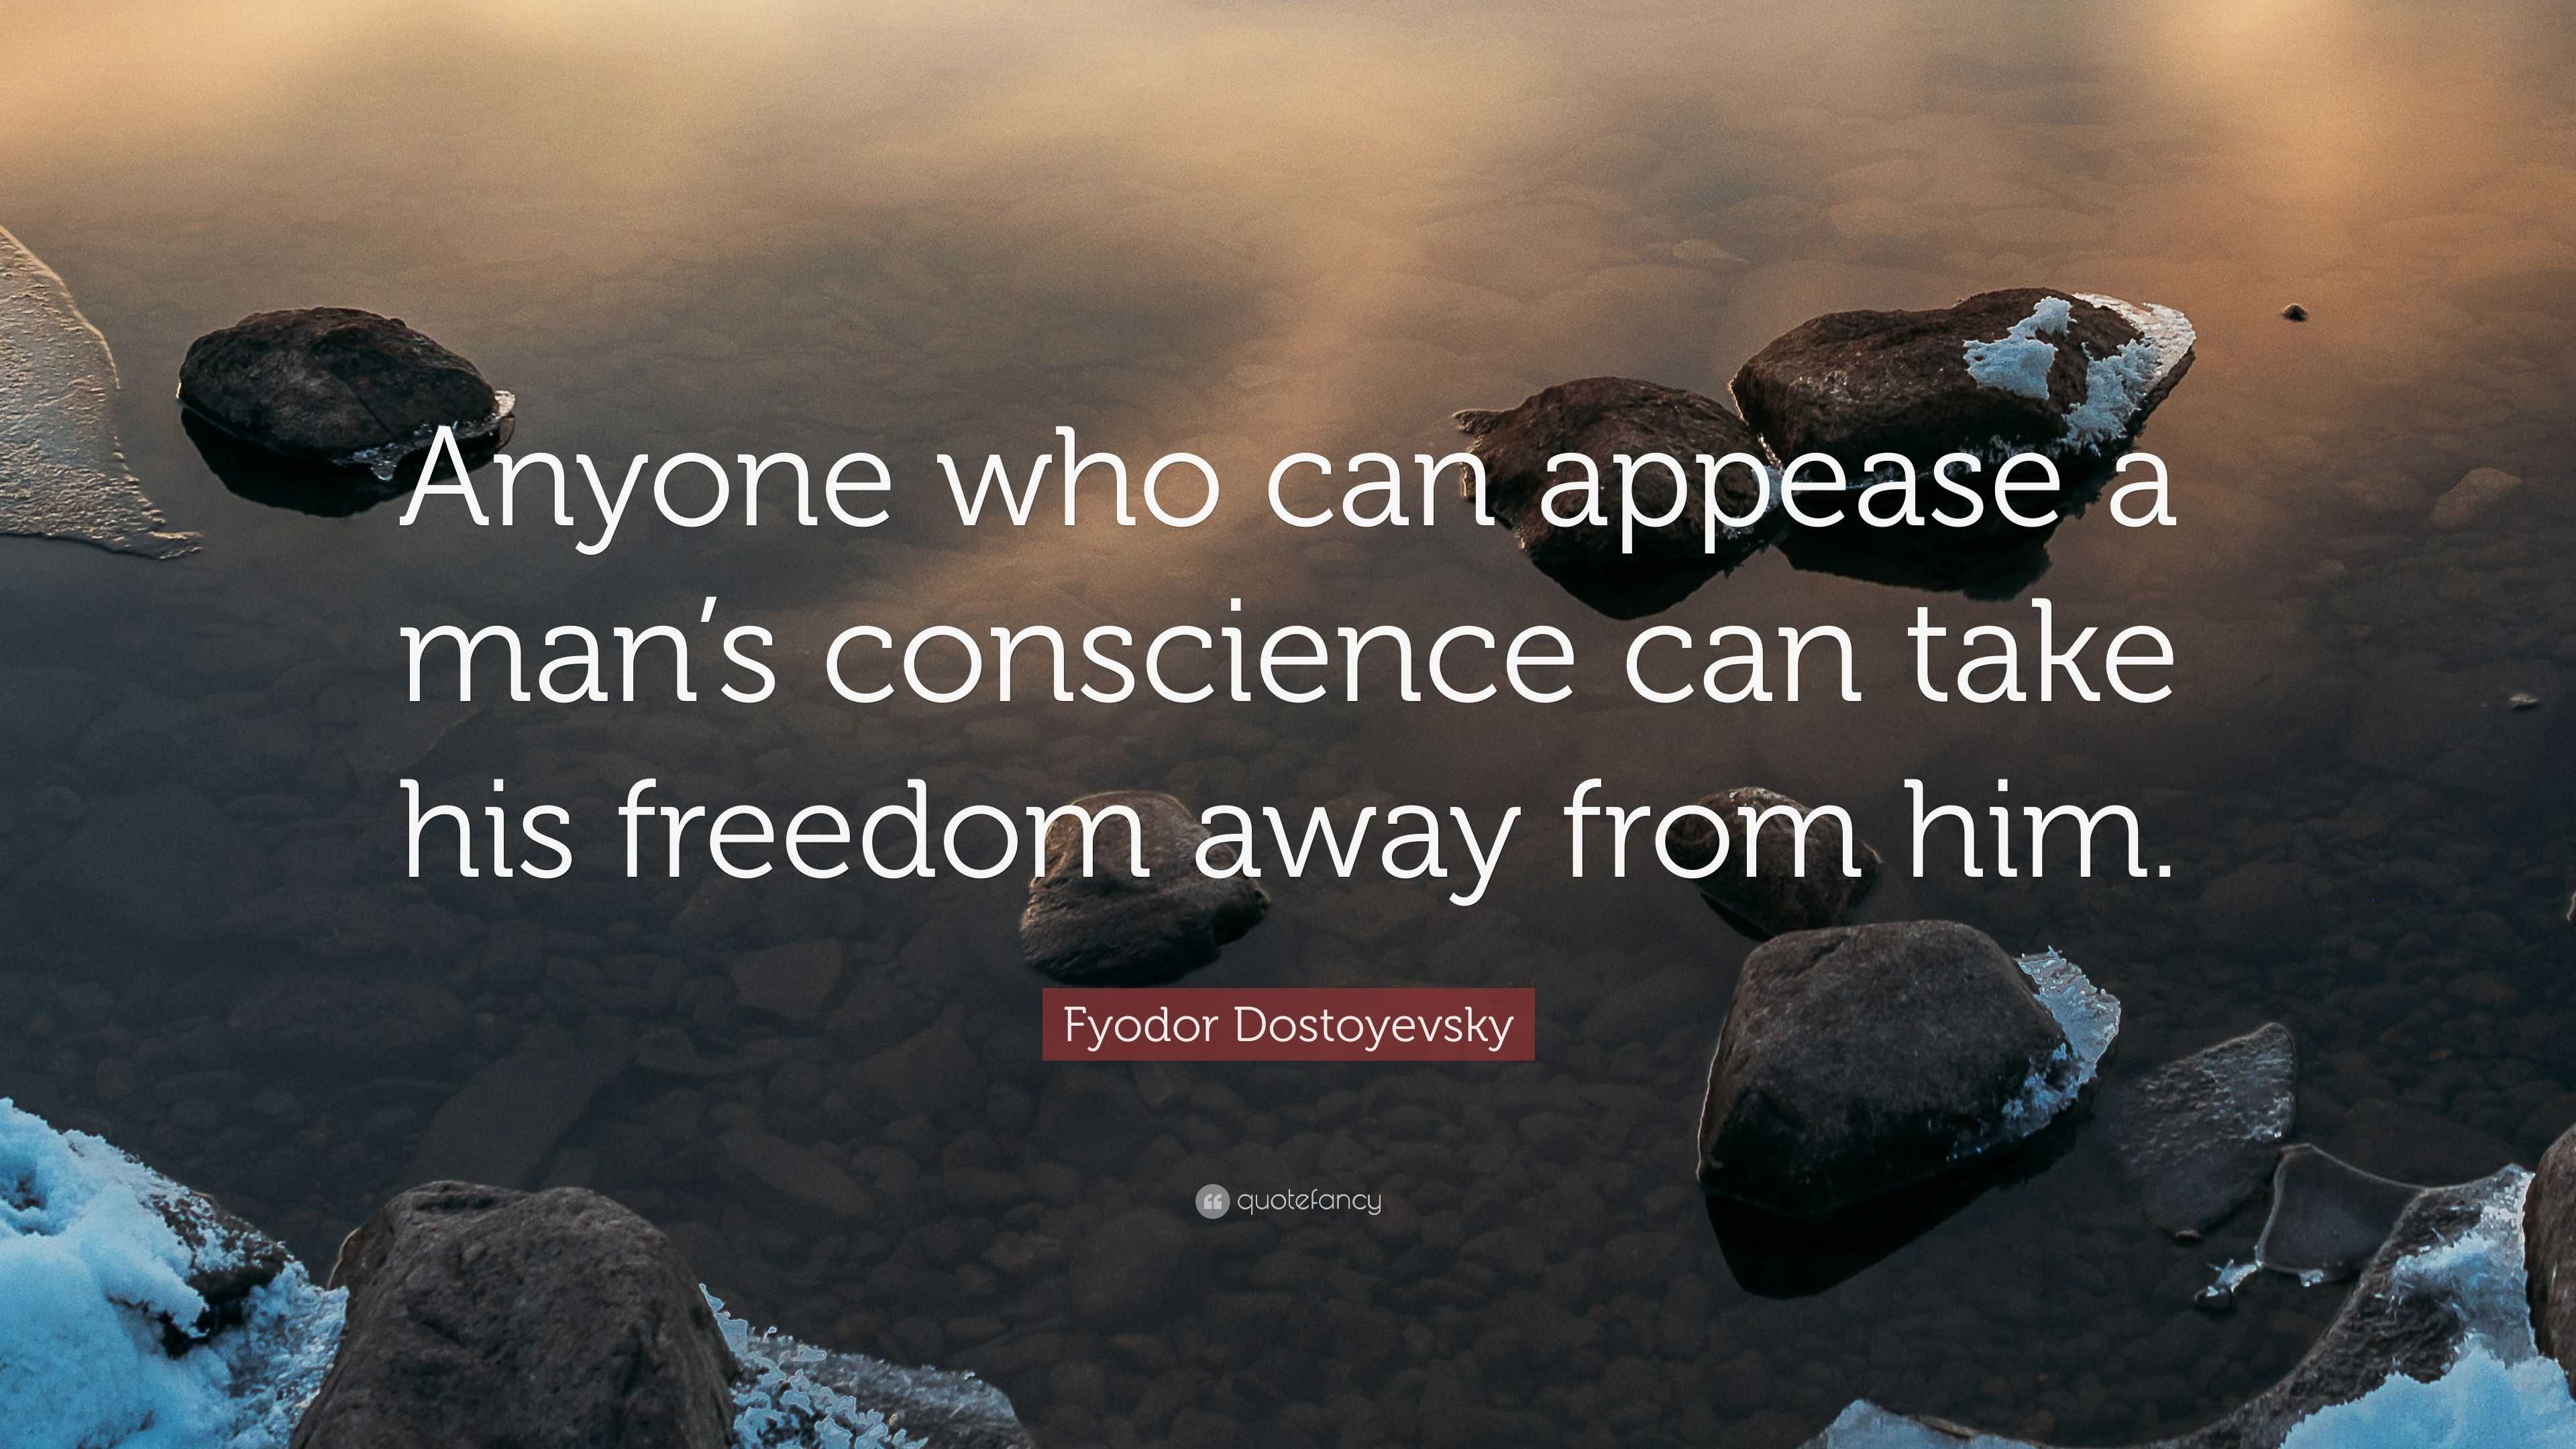 Fyodor Dostoyevsky Quote: “Anyone who can appease a man’s conscience ...